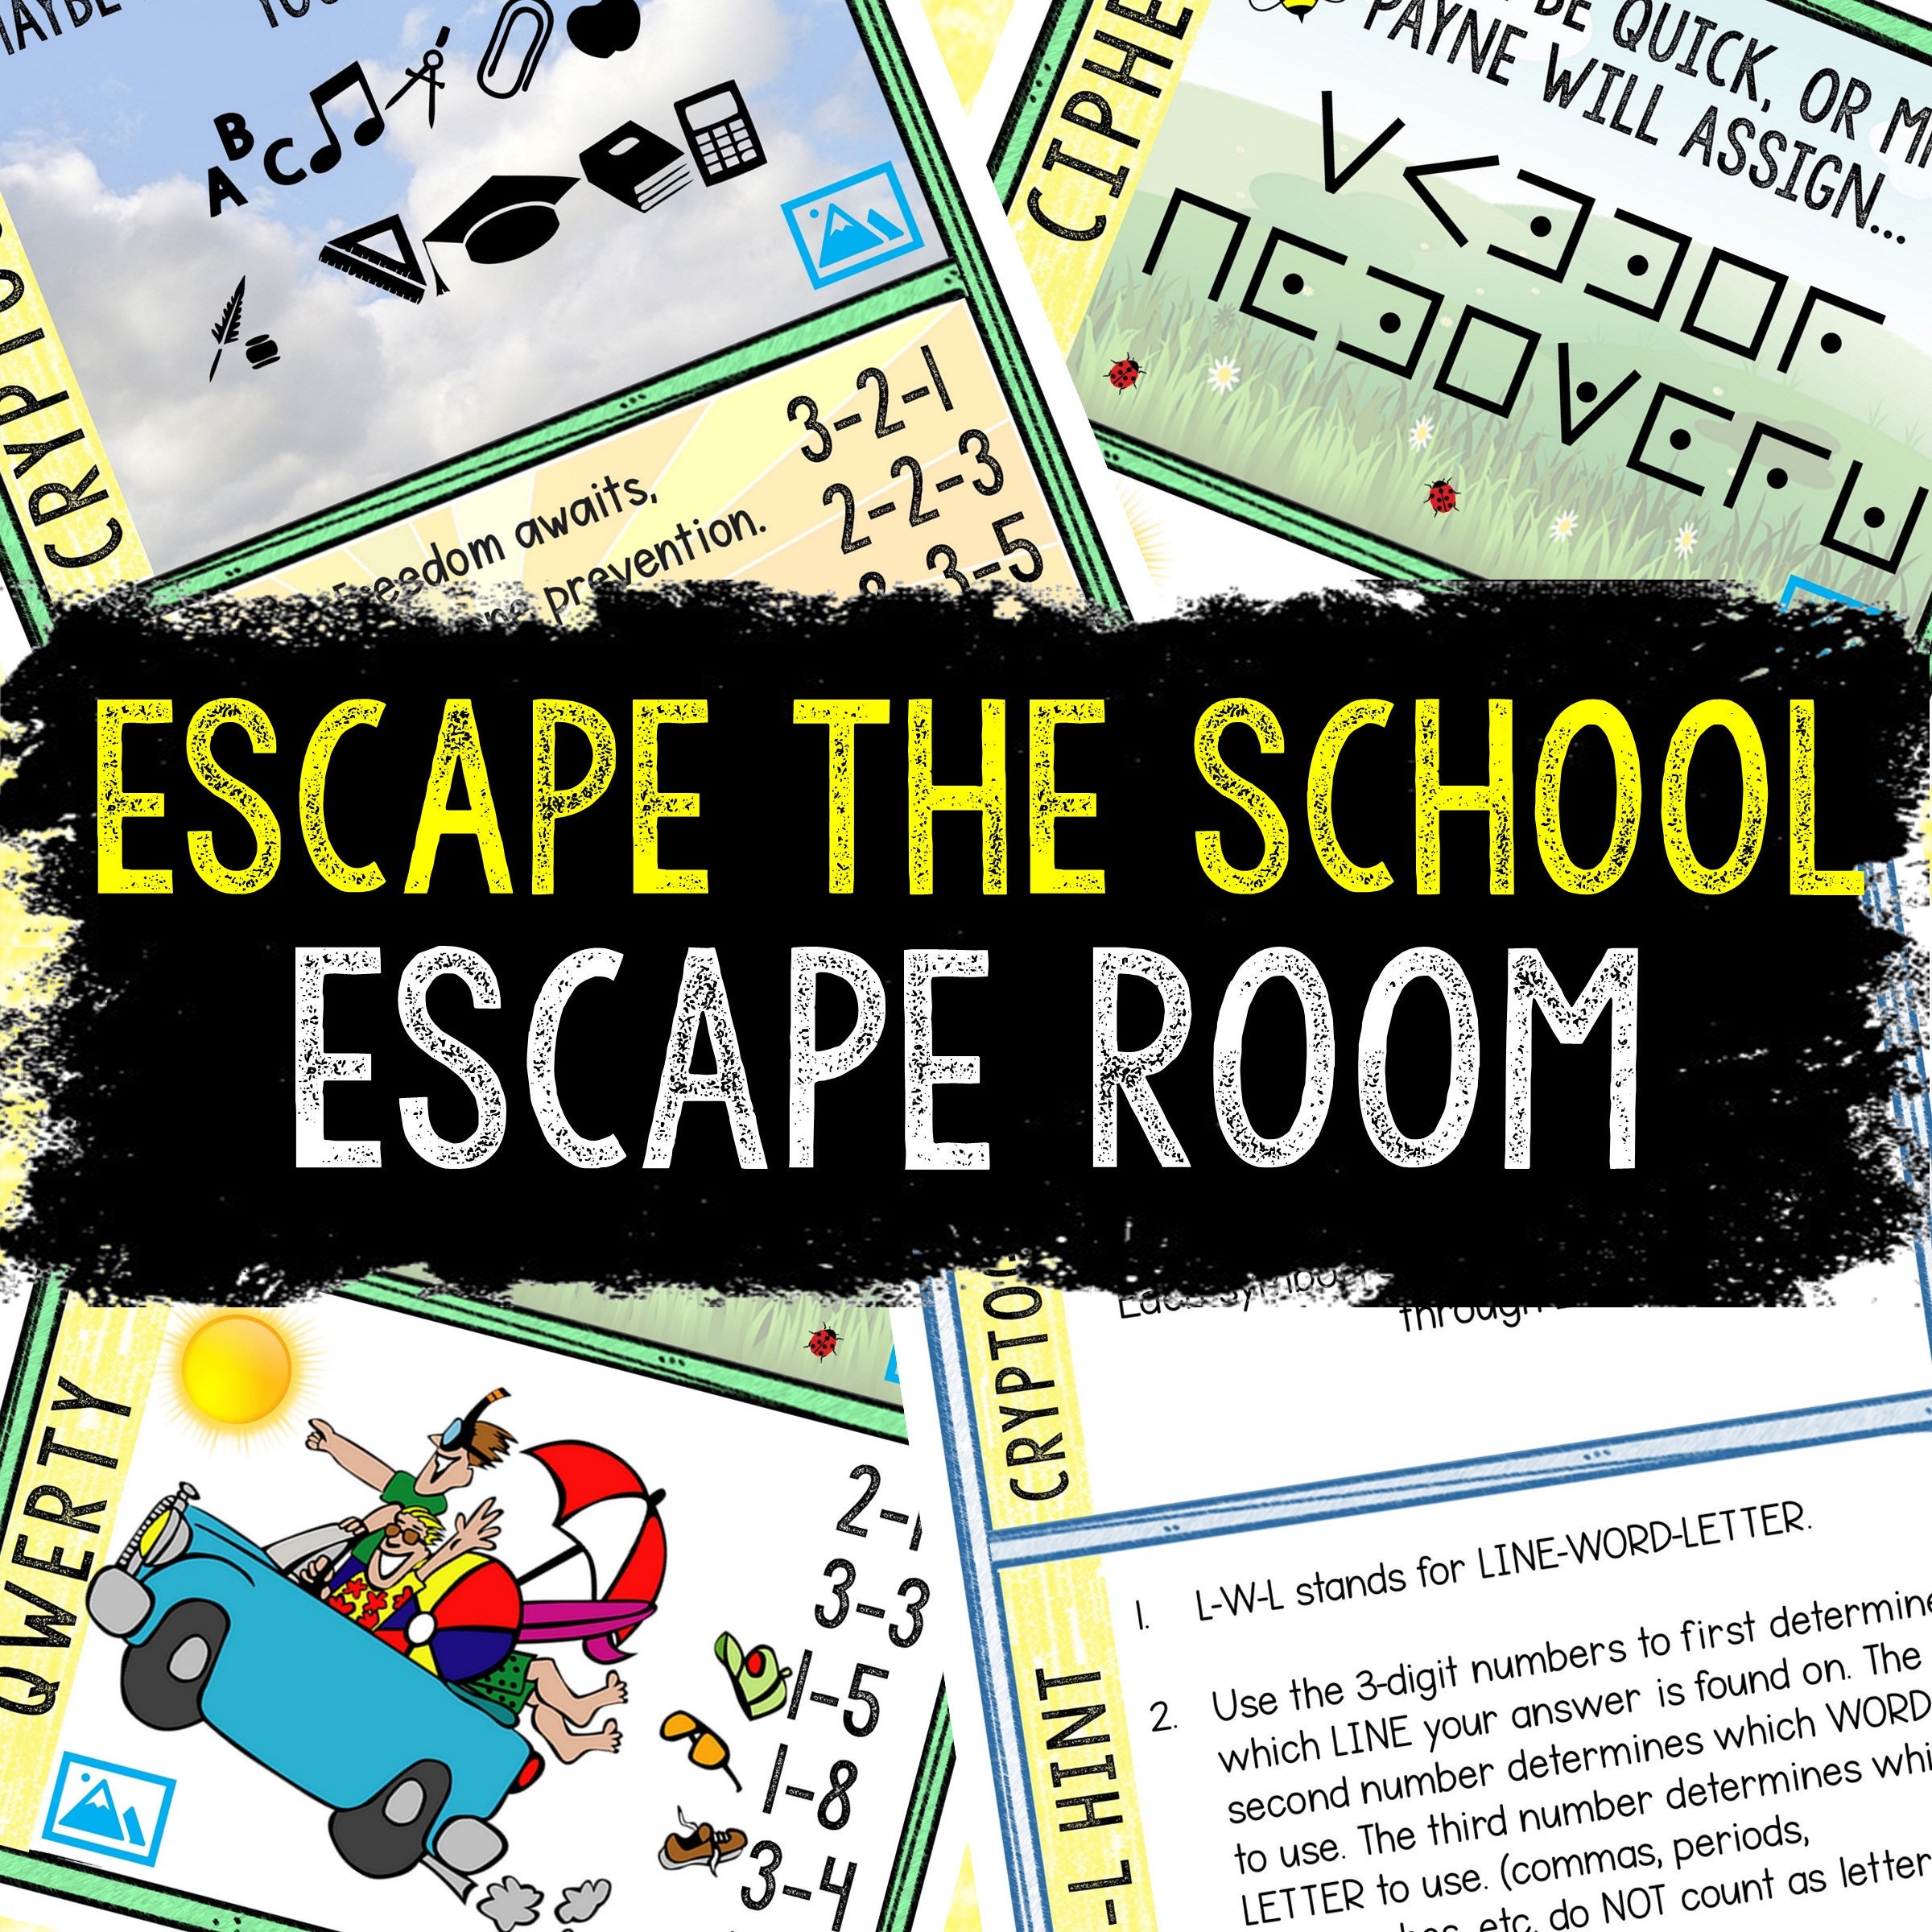 Football Trivia Escape Game - Escape Room for Kids - Printable Party G